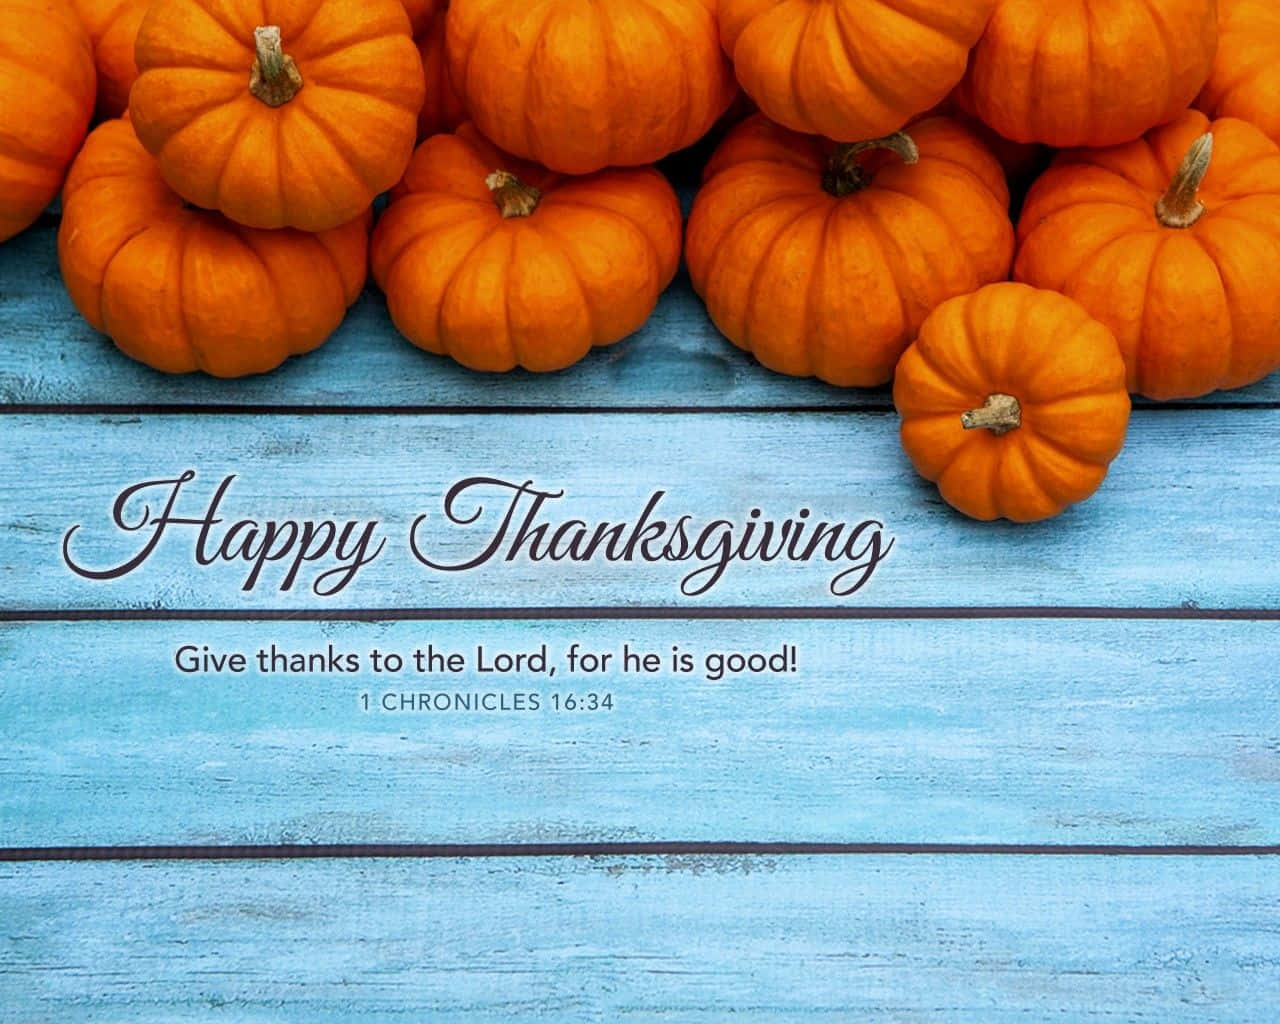 Feel the spirit of Thanksgiving with this beautiful image! Wallpaper